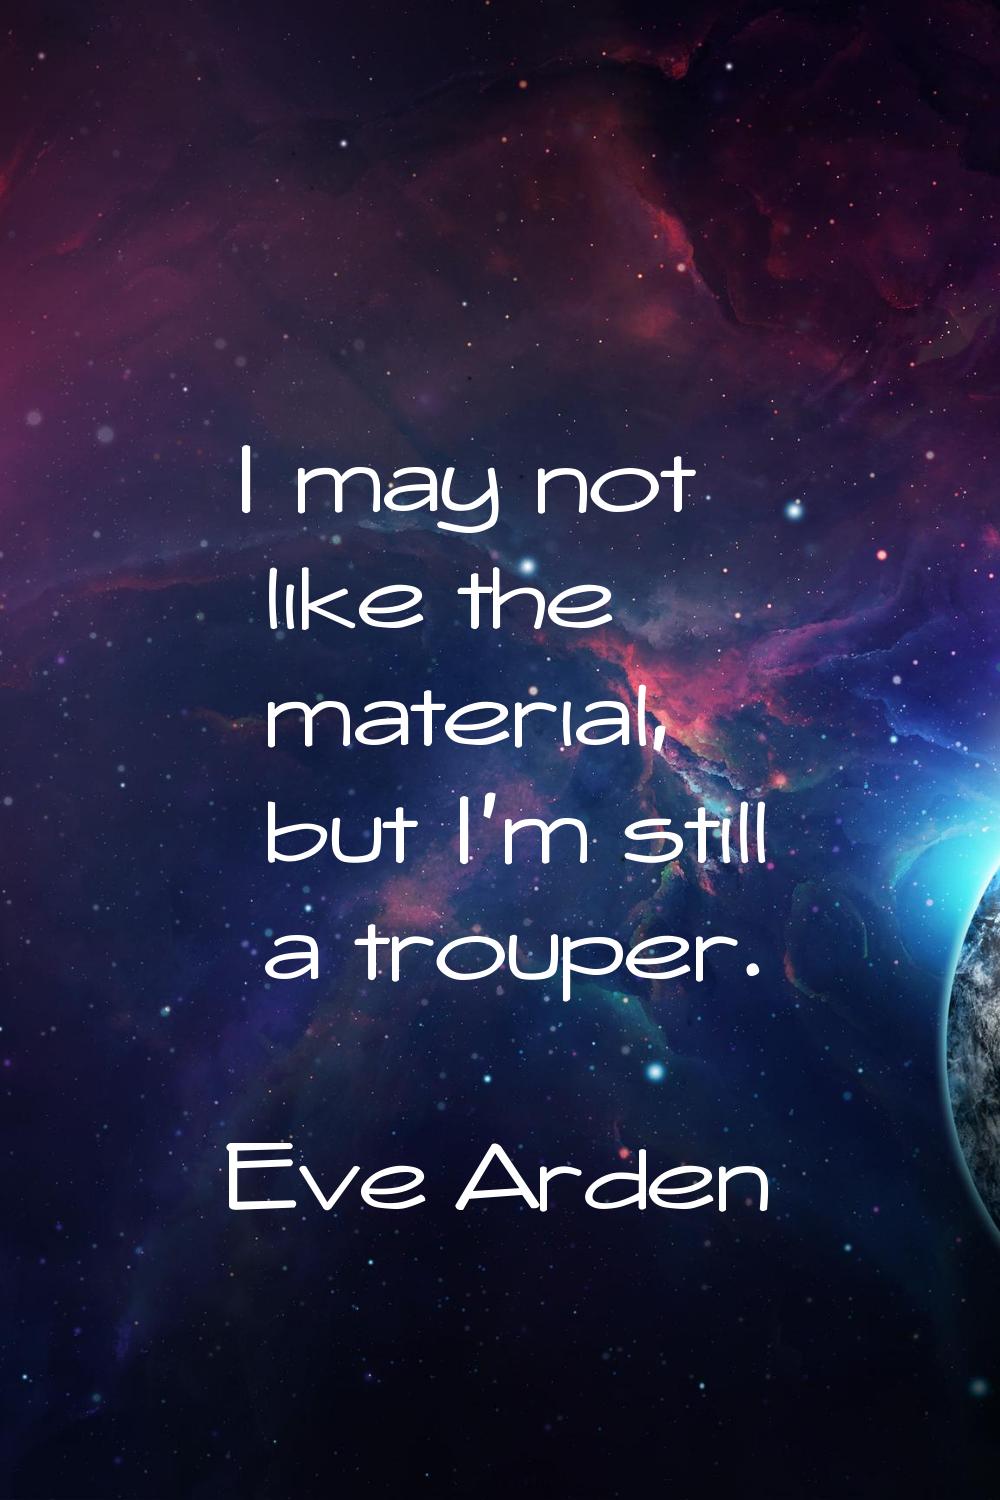 I may not like the material, but I'm still a trouper.